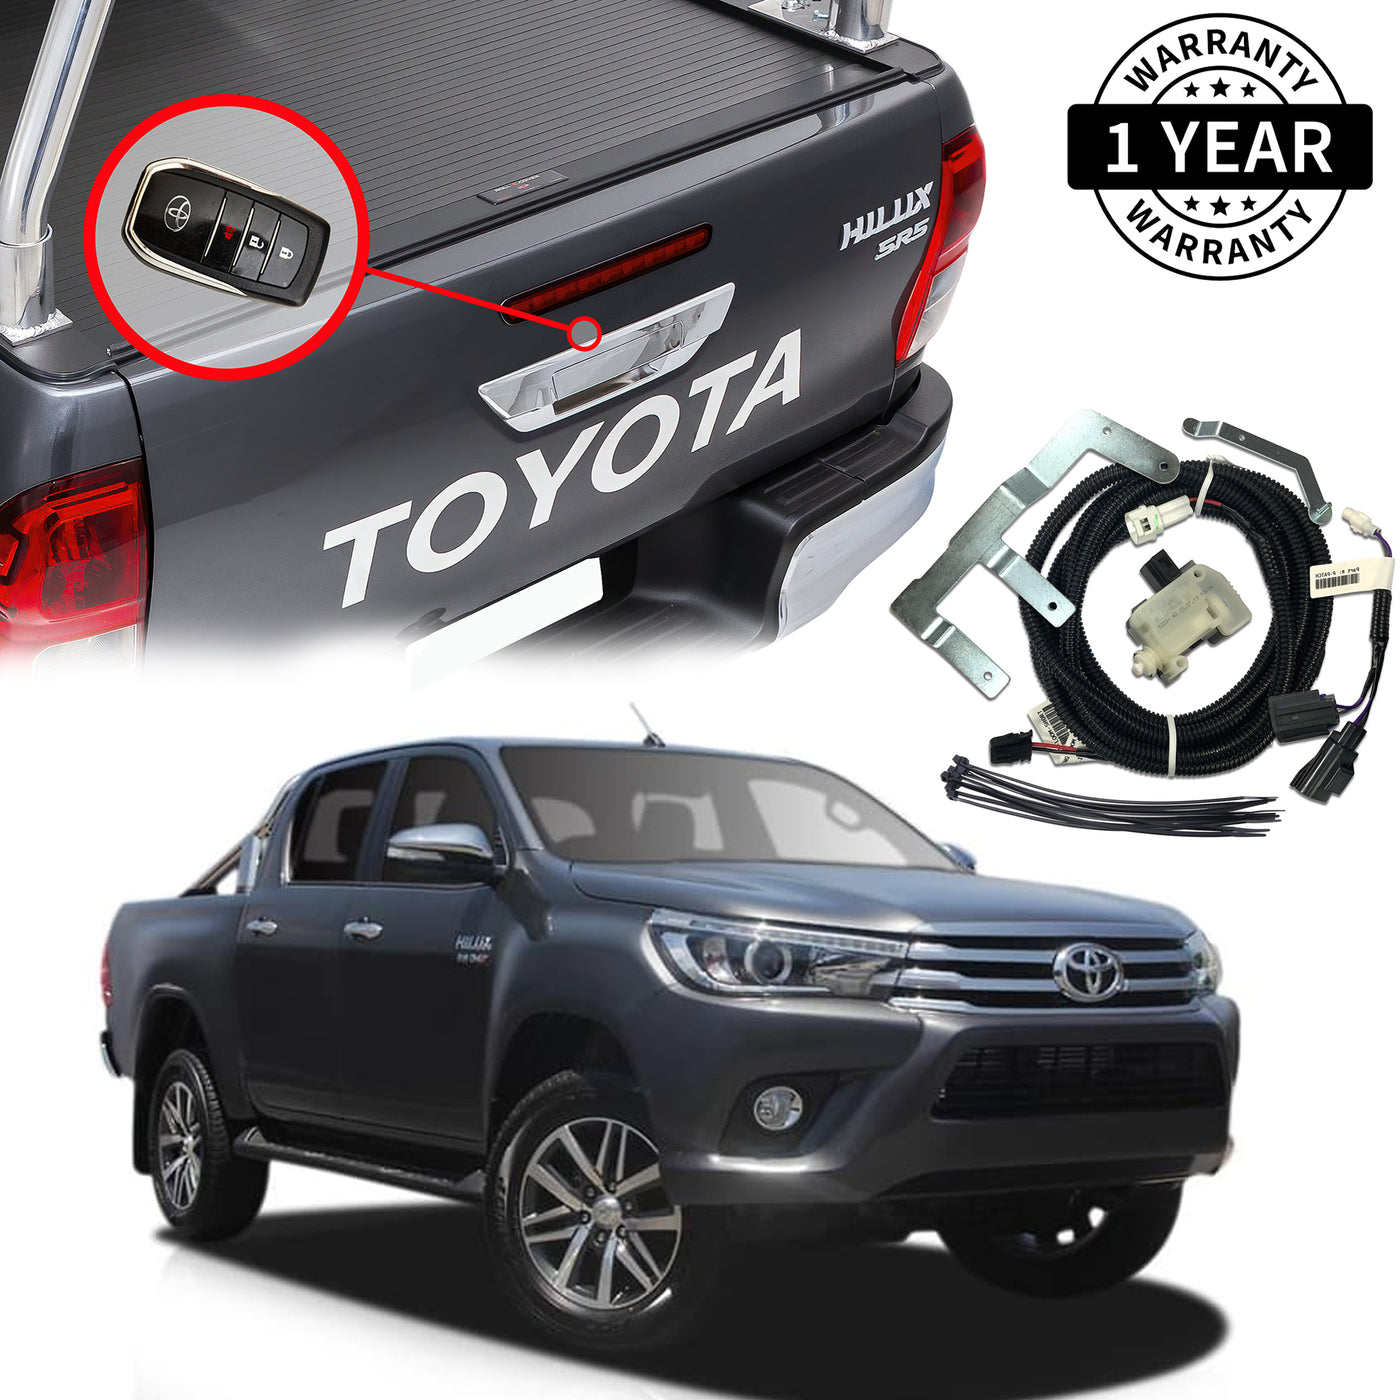 Toyota Hilux Tailgate Central Locking Kit Suit 2015 - 2018 (without barrel lock)